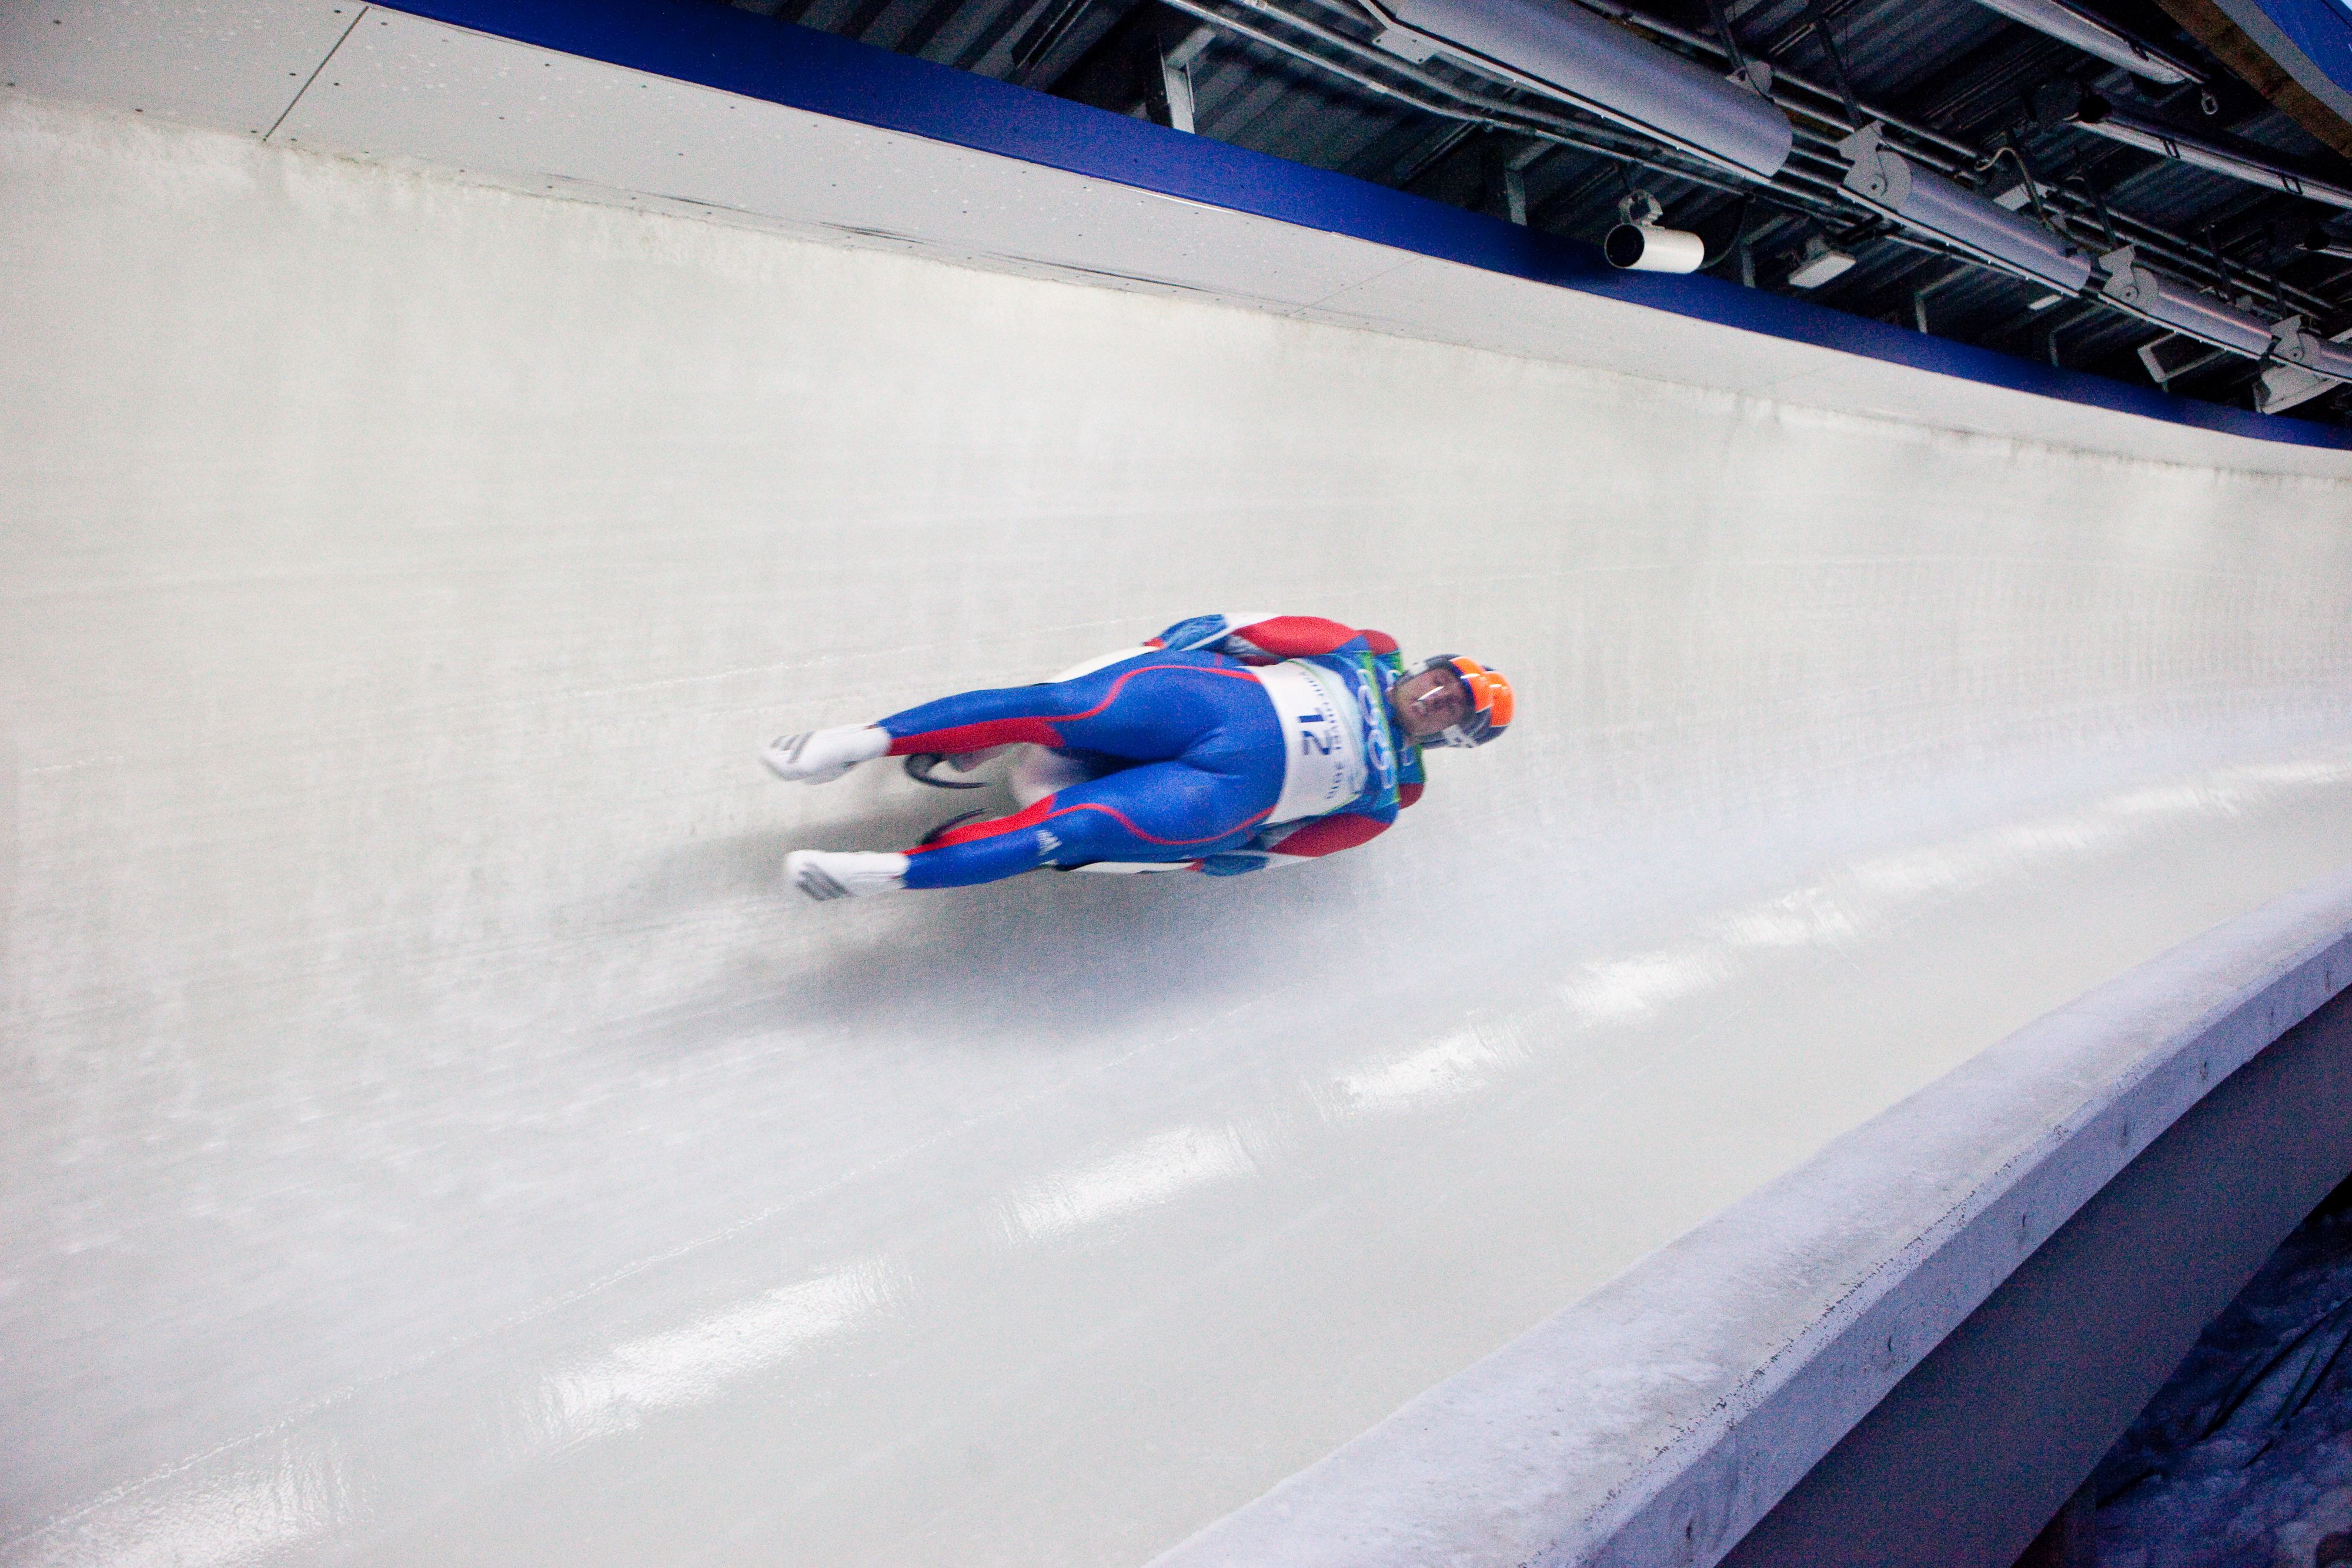 Photograph of person on a bobsled.